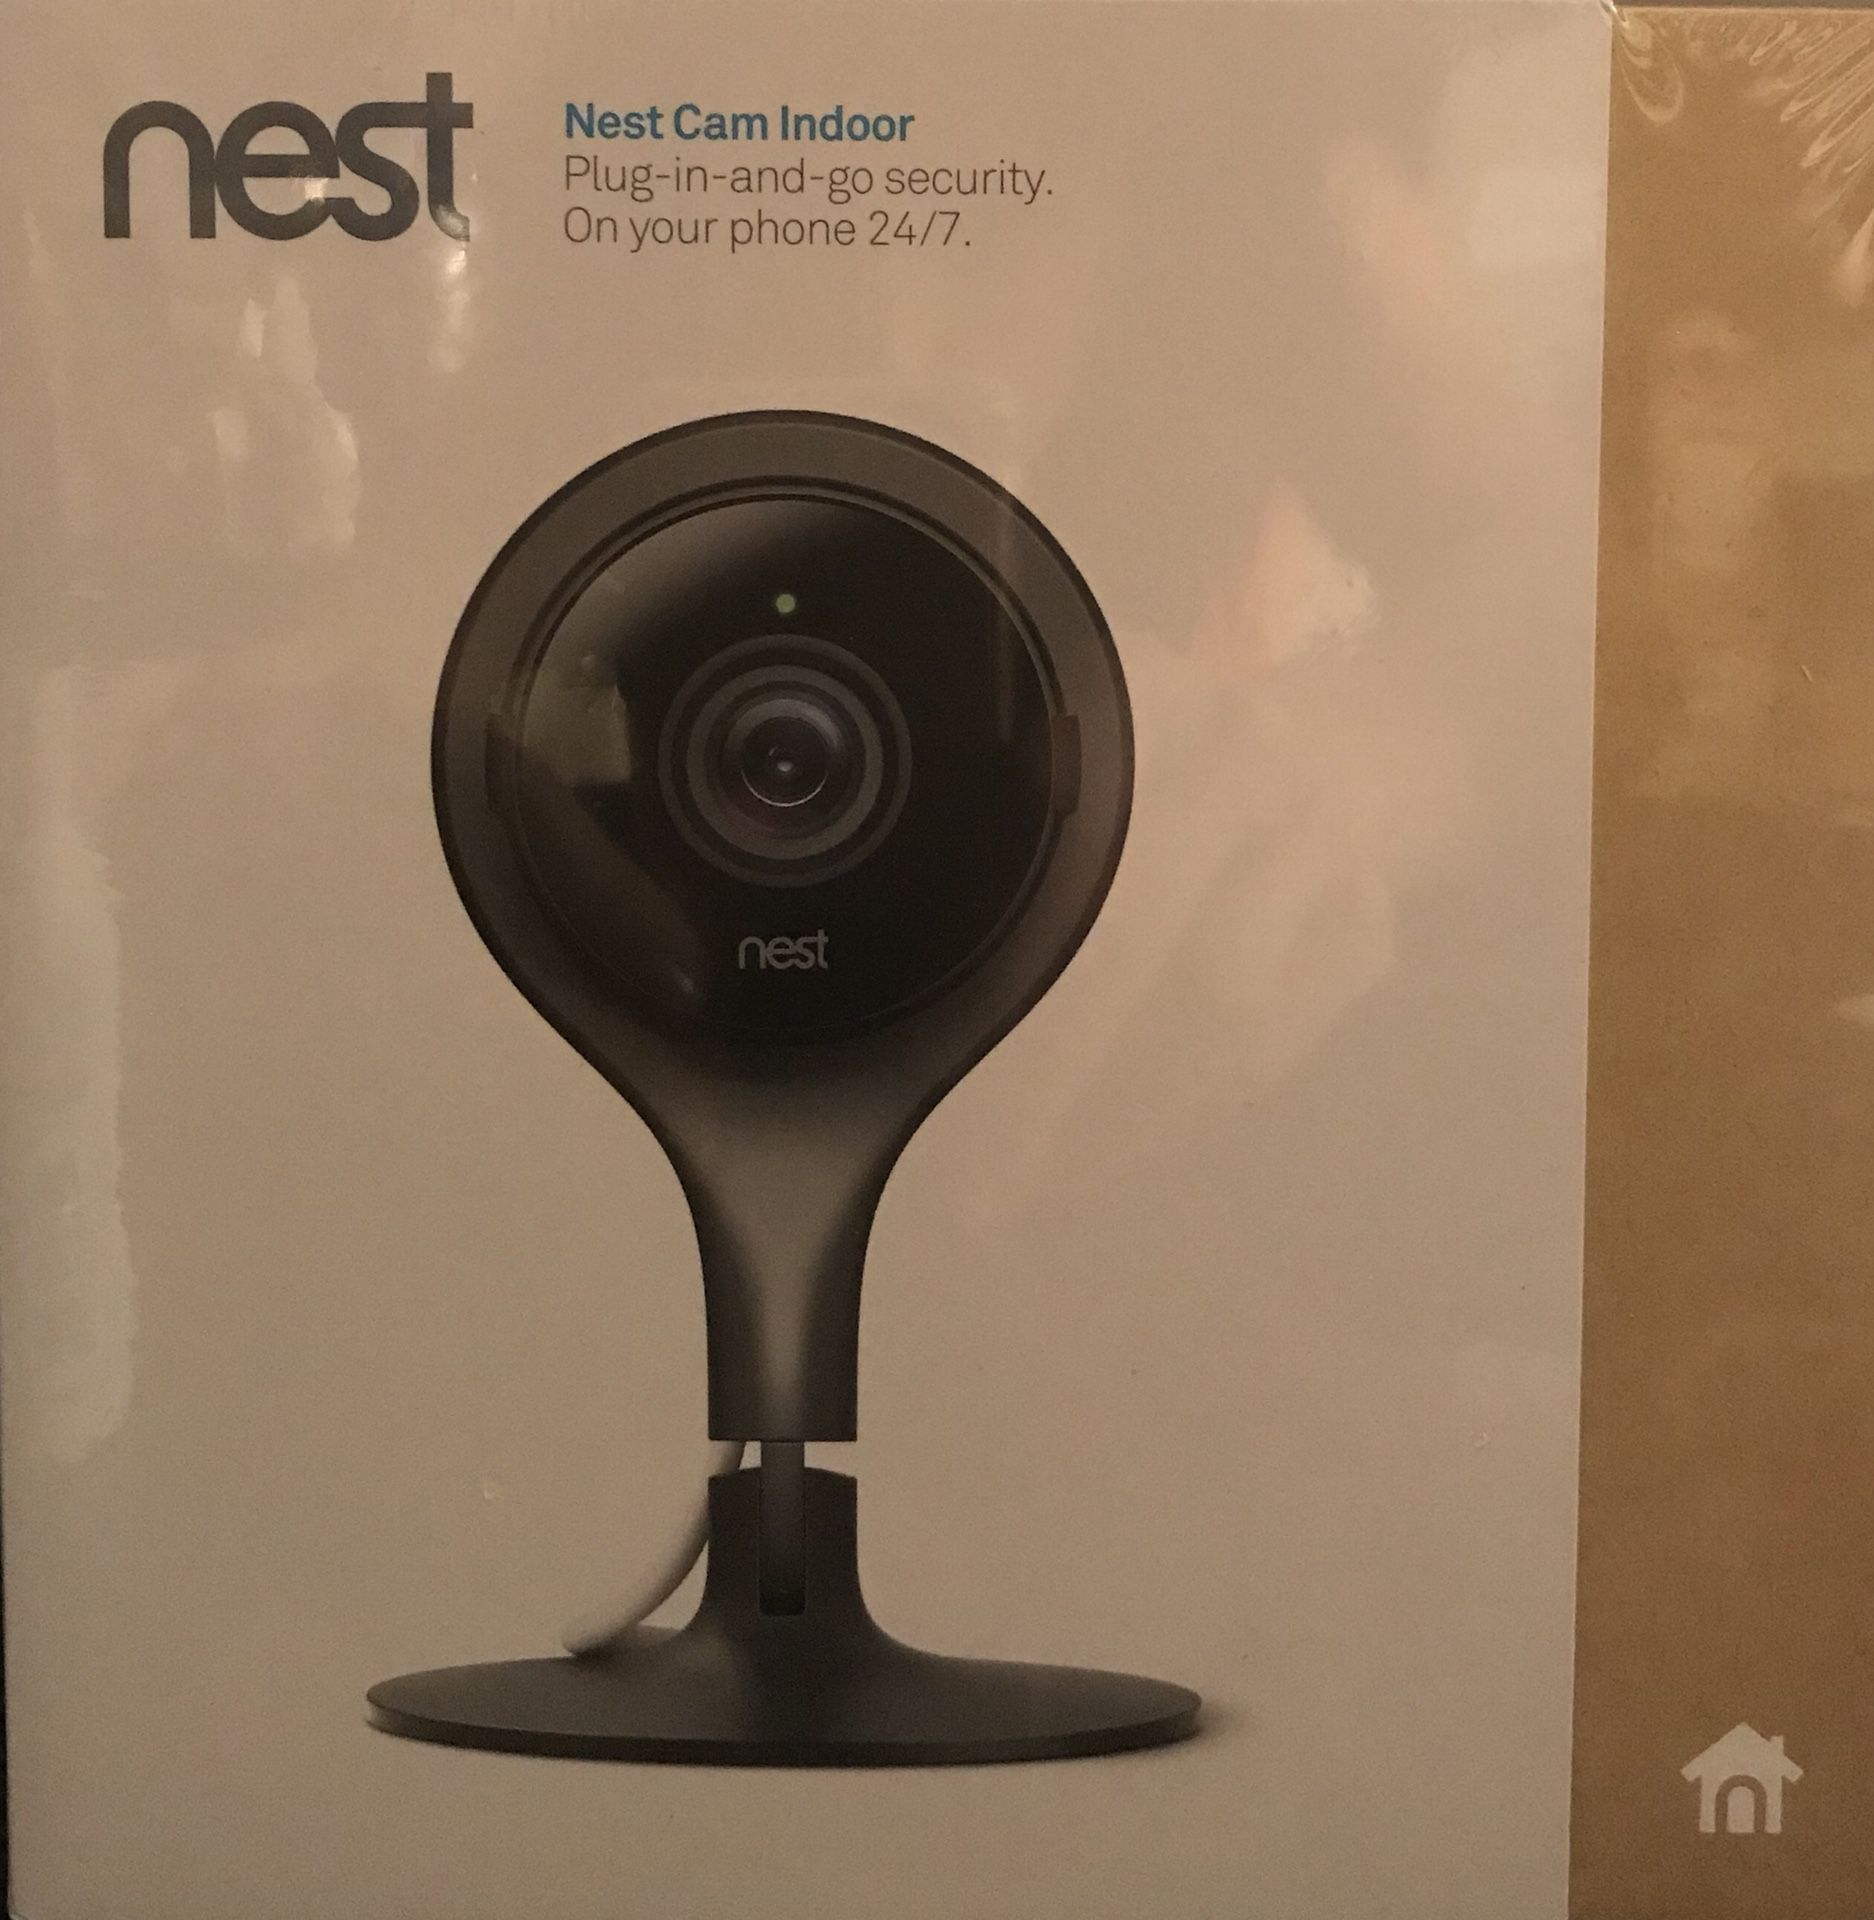 Brand new Nest indoor security camera still in the box